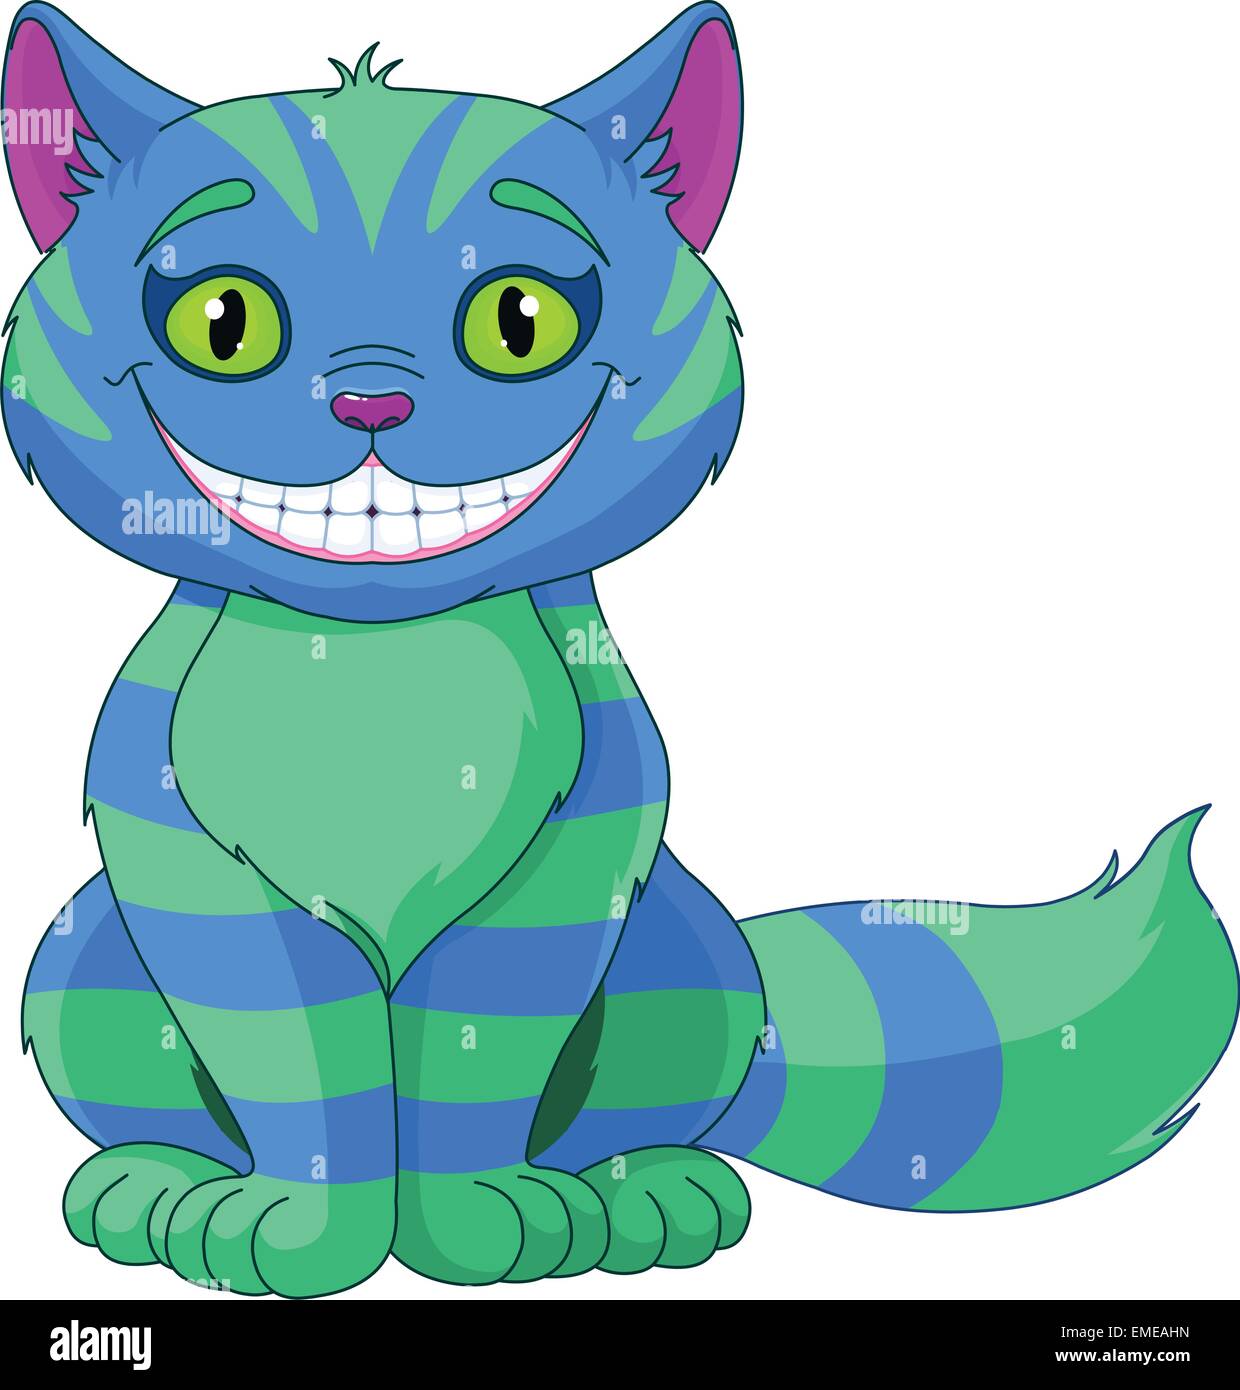 Smiling Cheshire Cat Stock Vector